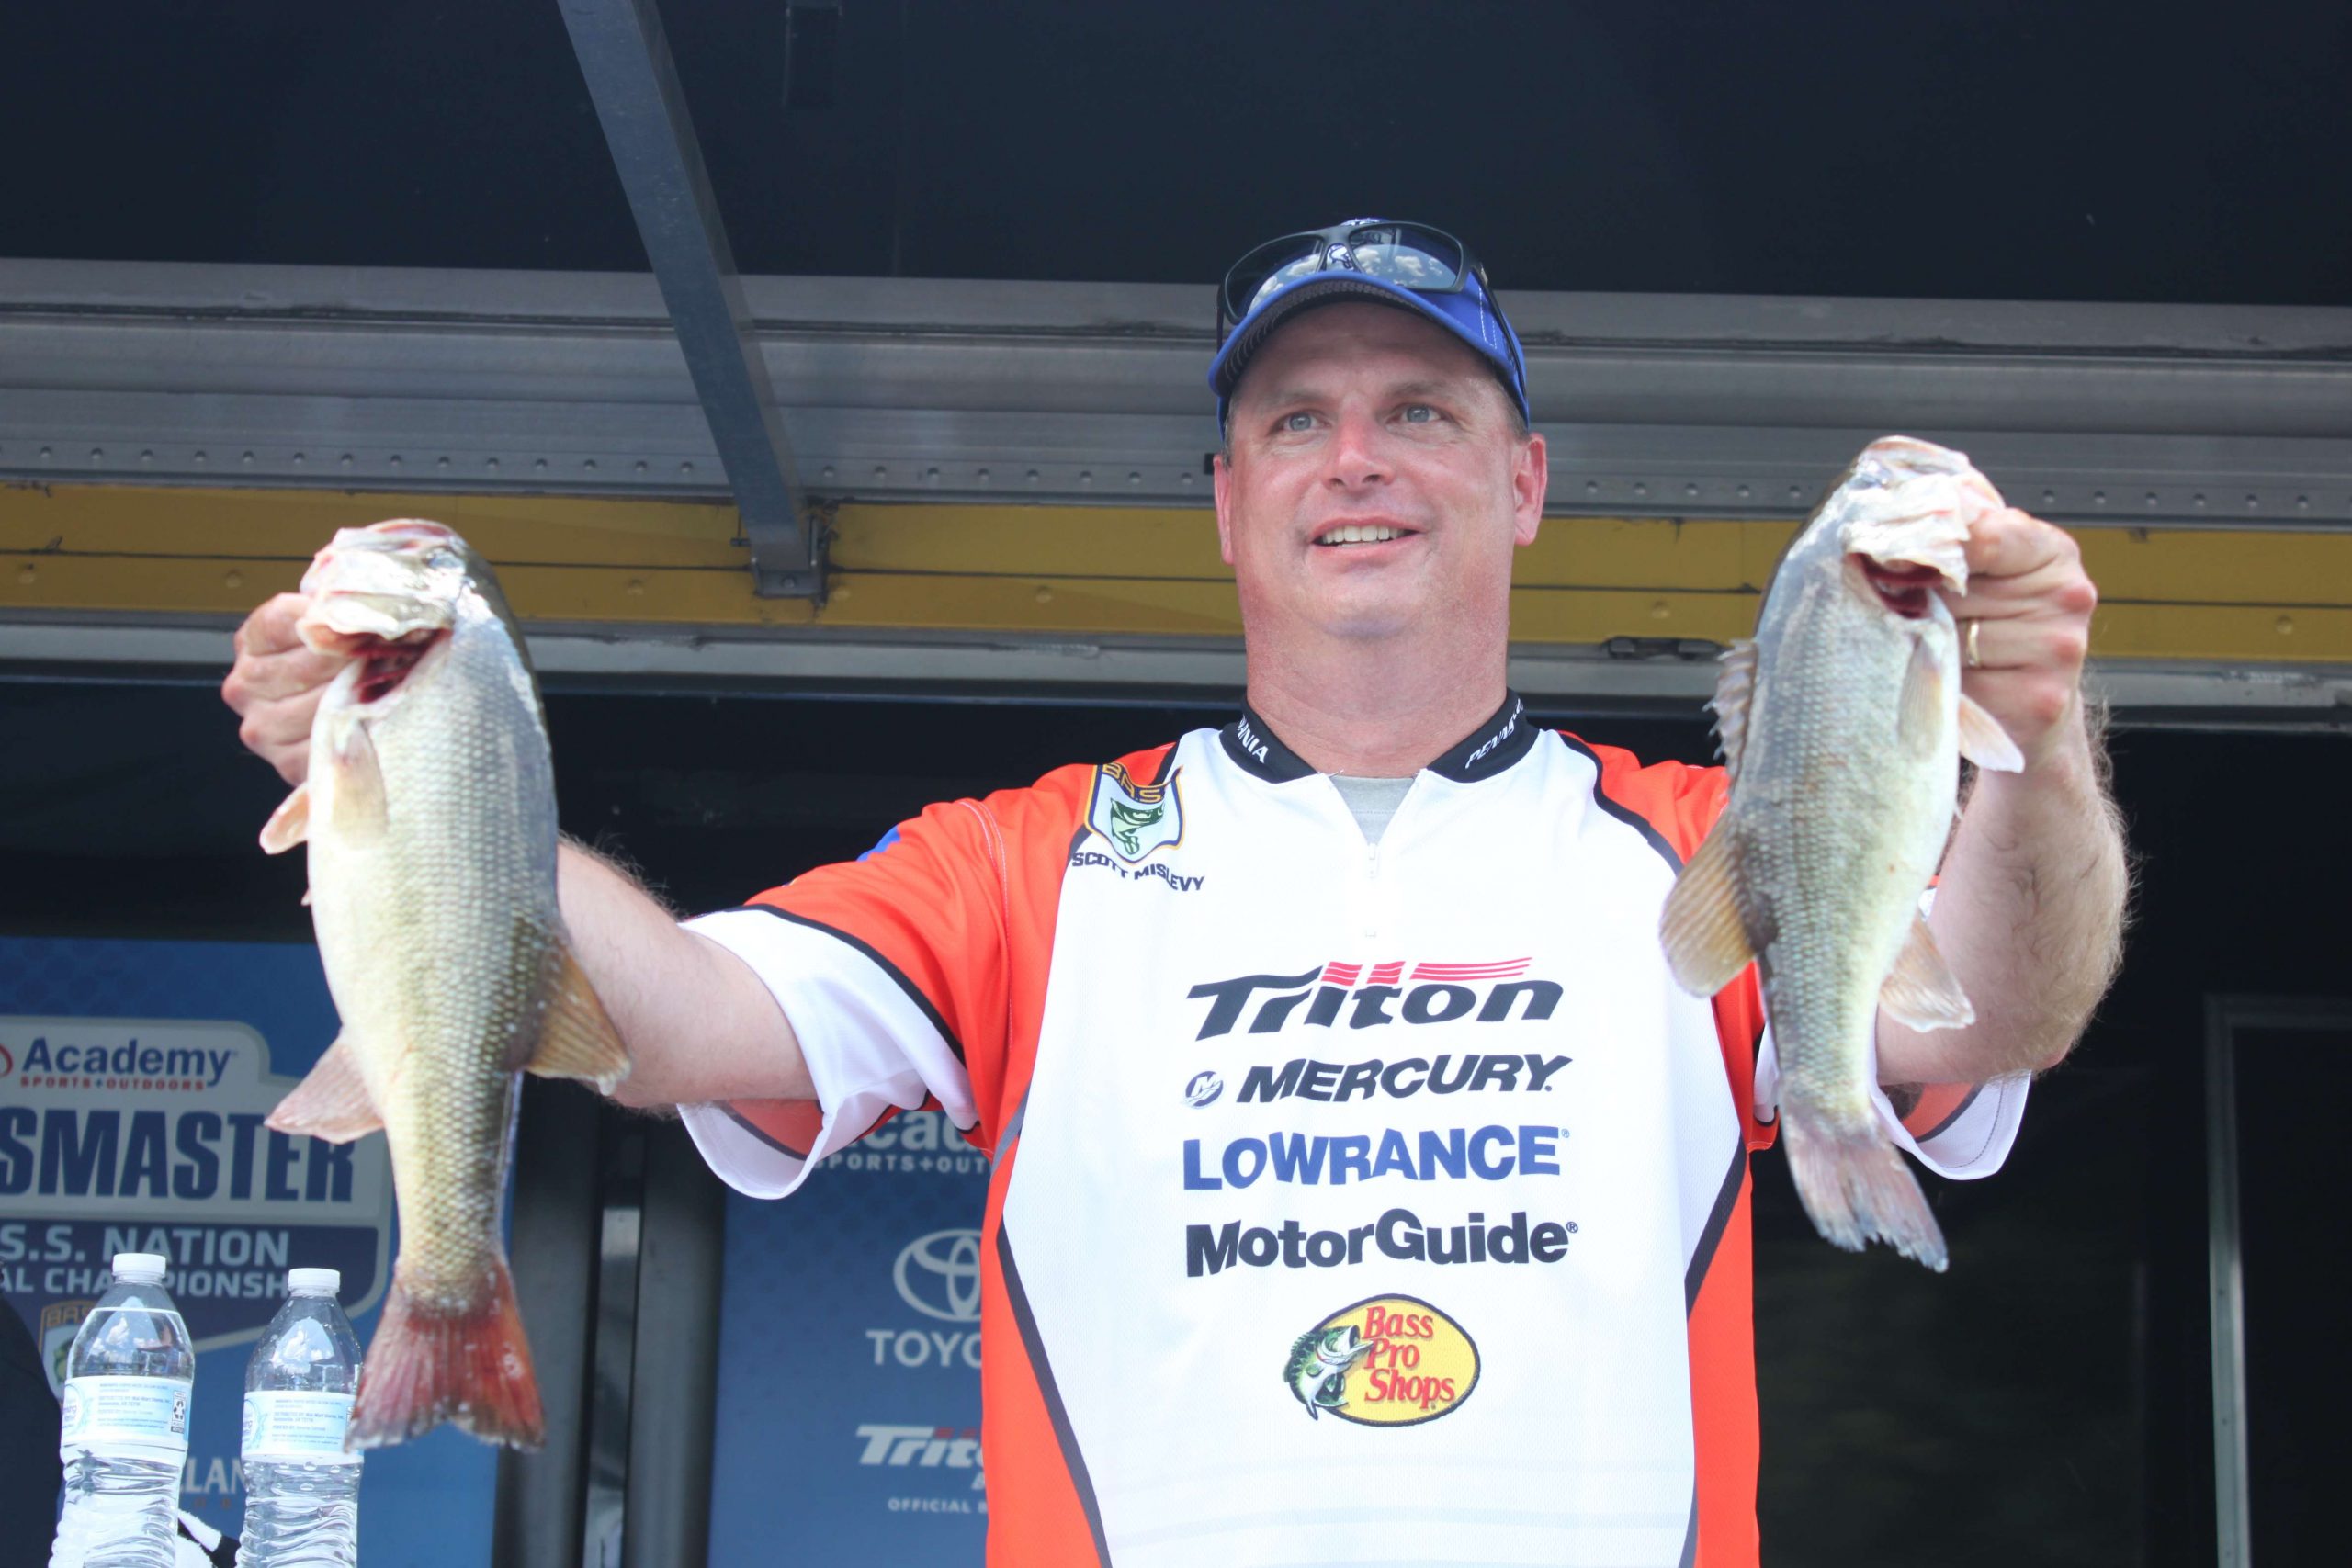 Thereâs Pennsylvaniaâs Scott Mislevy, who caught 7-12 in the boater division.